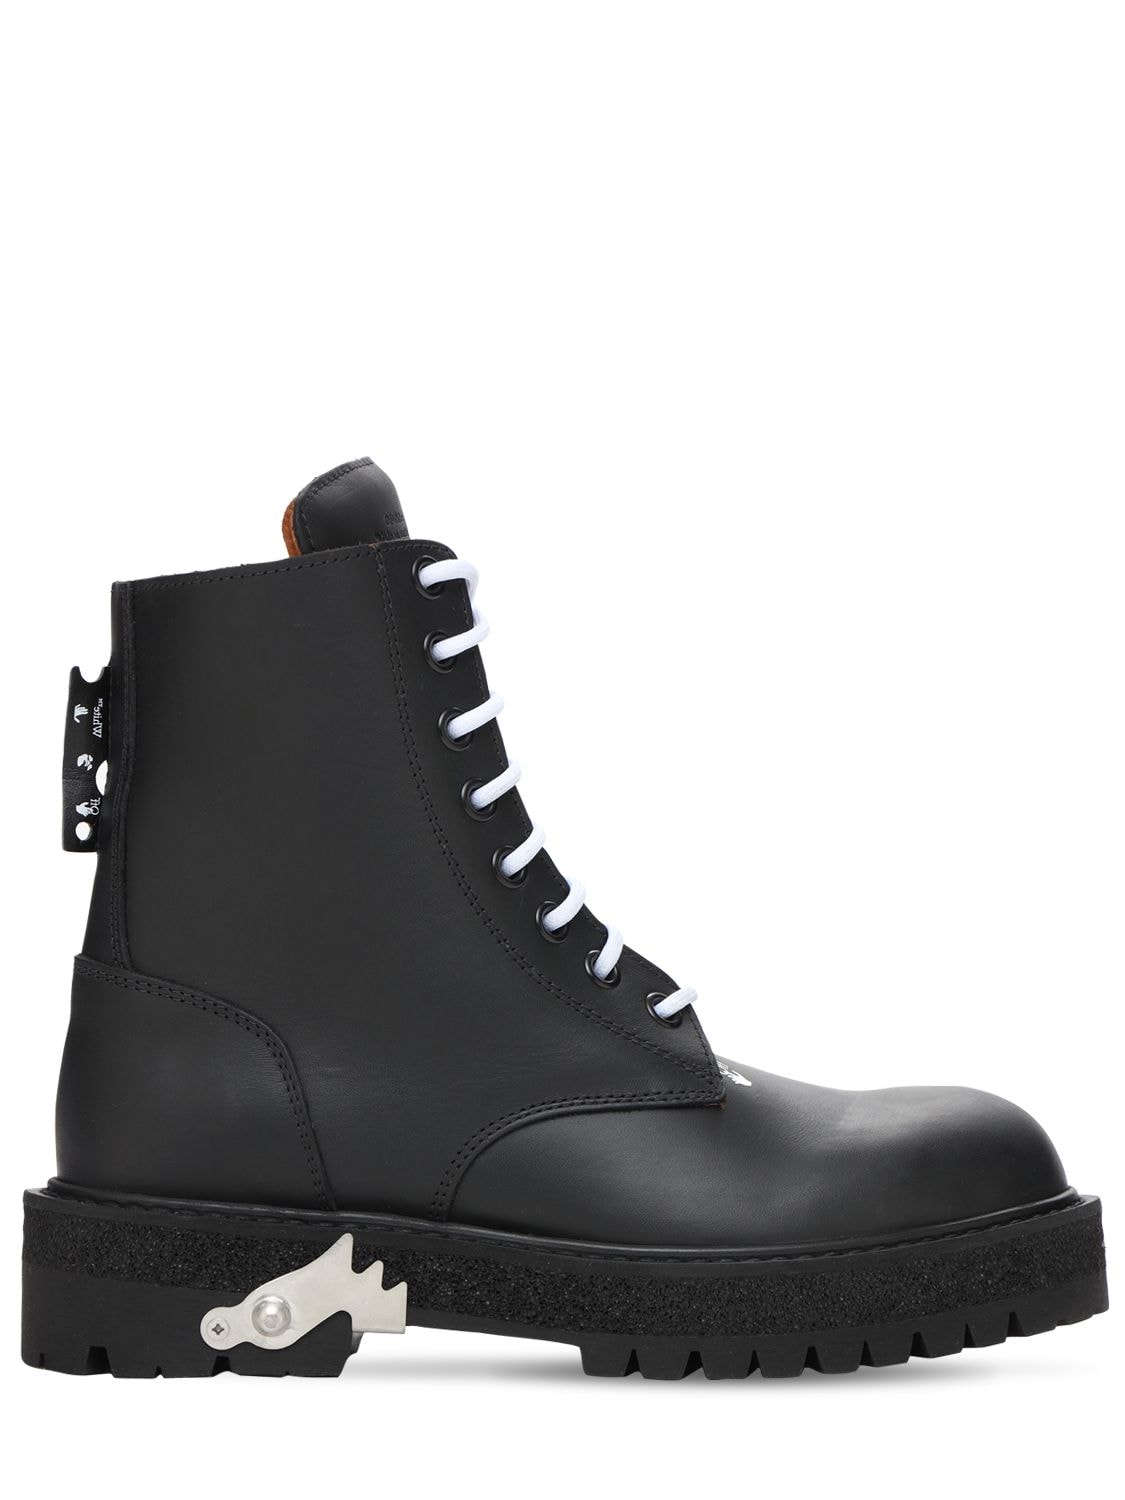 OFF-WHITE LACE-UP LEATHER BOOTS,73IJSY014-MTAWMA2